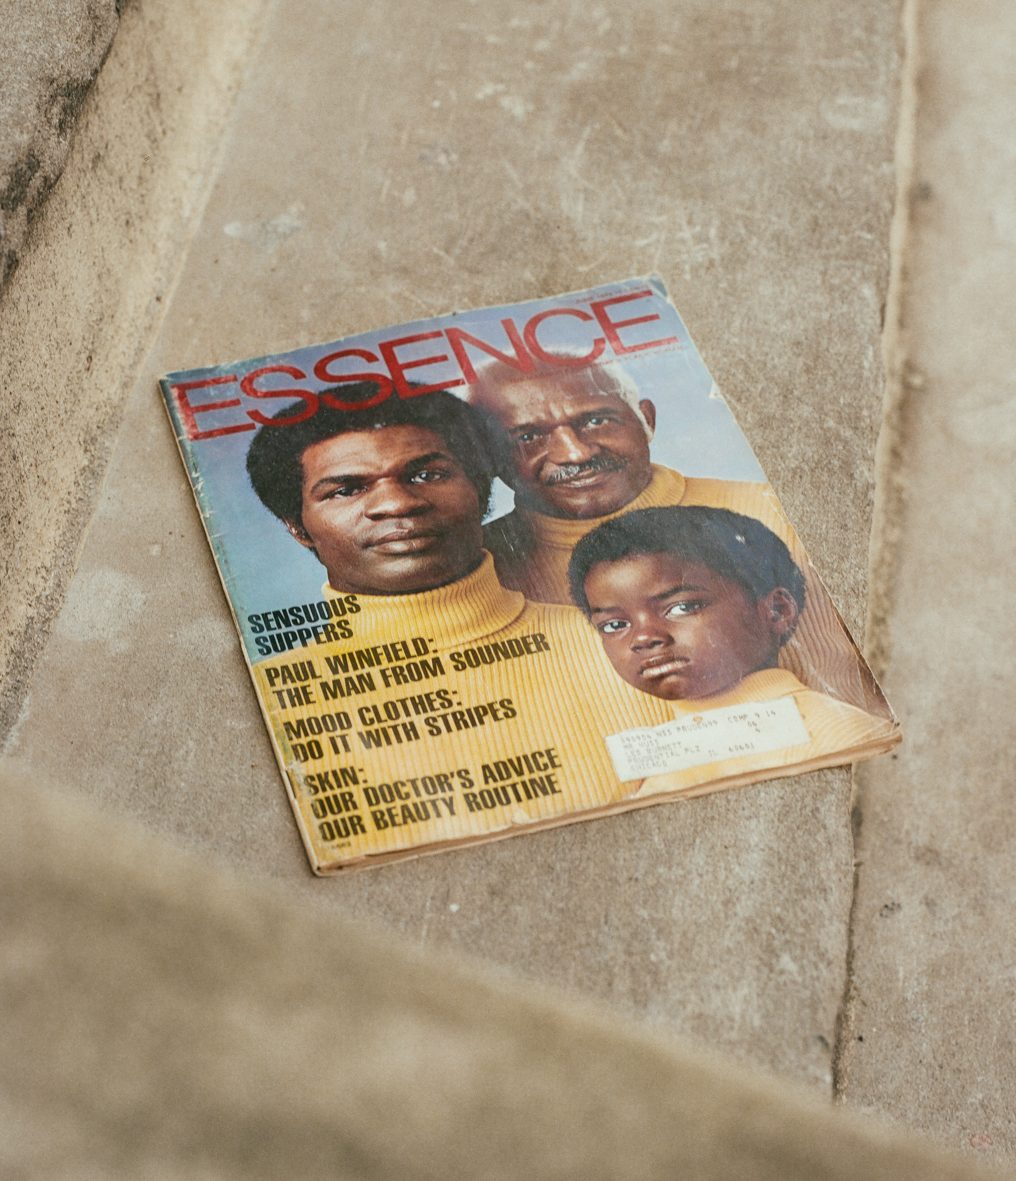 An image of three men in yellow turtlenecks on the cover of a magazine which rests on concrete steps. The magazine has ESSENCE written across the top in red, all-caps, sans serif type. Along the left side of the magazine in black, all-caps, sans serif, condensed type reads: “SENSUOUS SUPPERS, PAUL WINFIELD: THE MAN FROM SOUNDER, MOOD CLOTHES: DO IT WITH STRIPES, SKIN: OUR DOCTOR’S ADVICE OUR BEAUTY ROUTINE.”